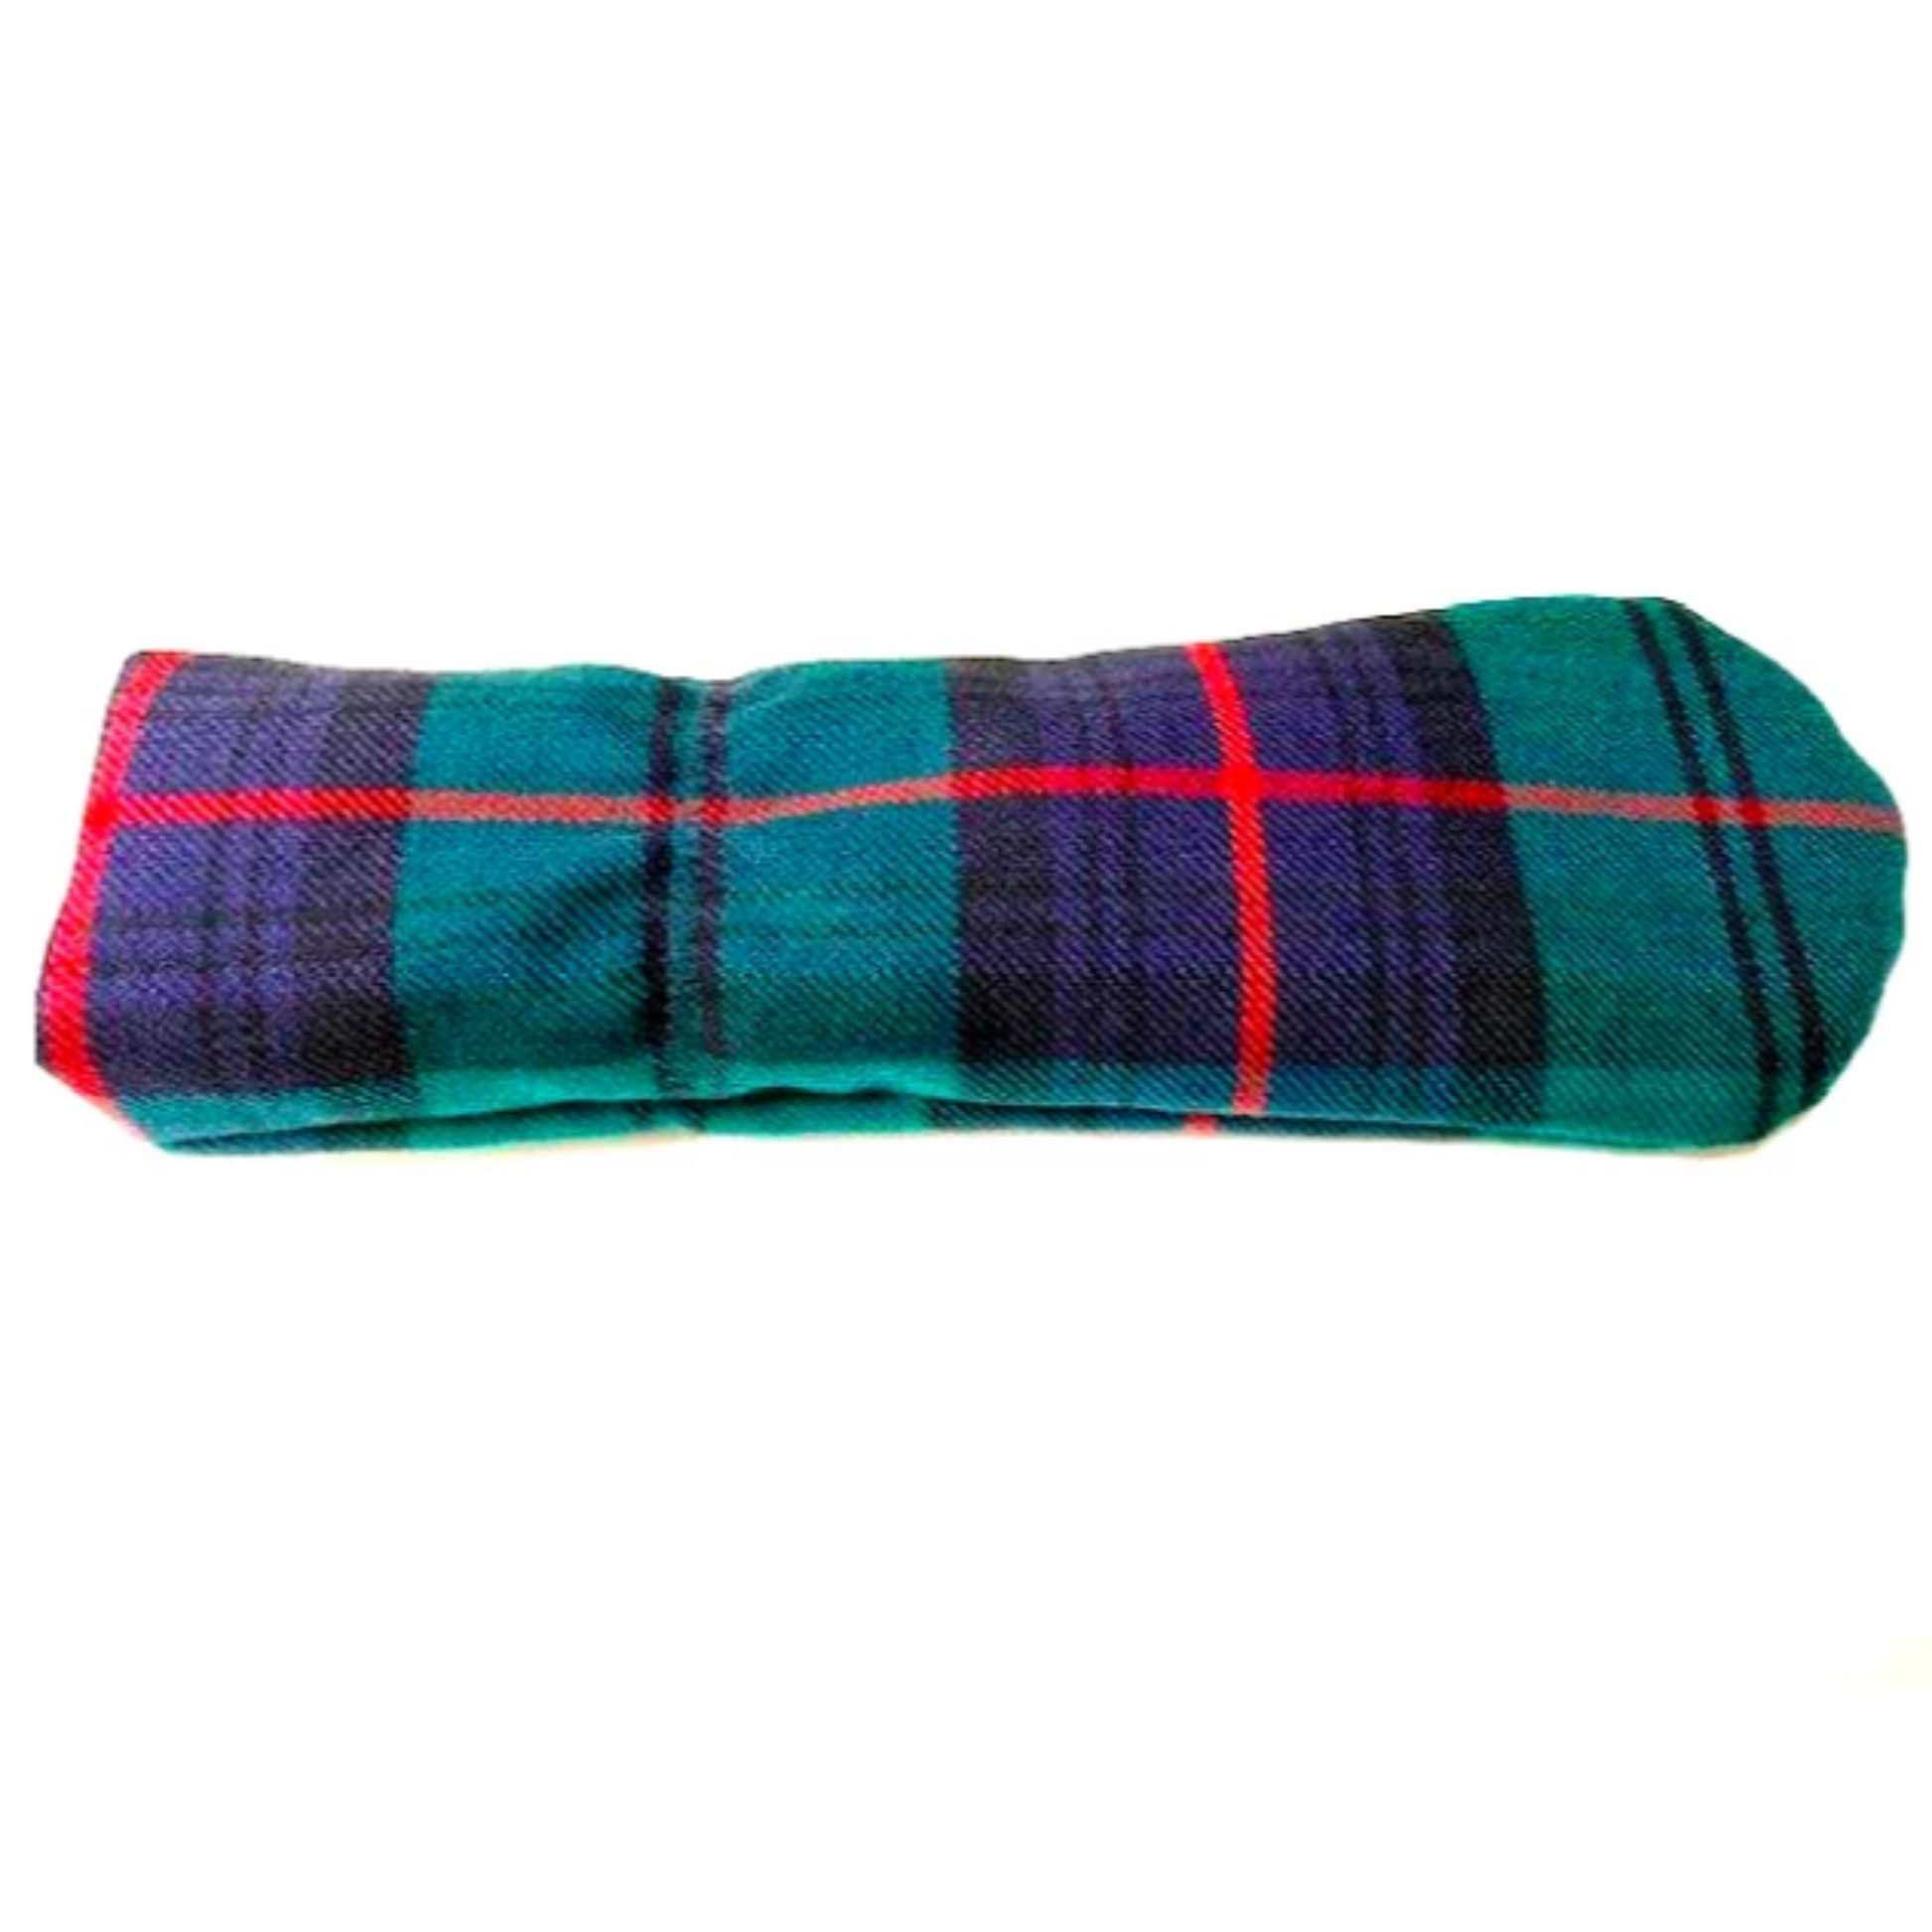 Scottish wool golf head cover tartan with green, black and navy with a red stripe.